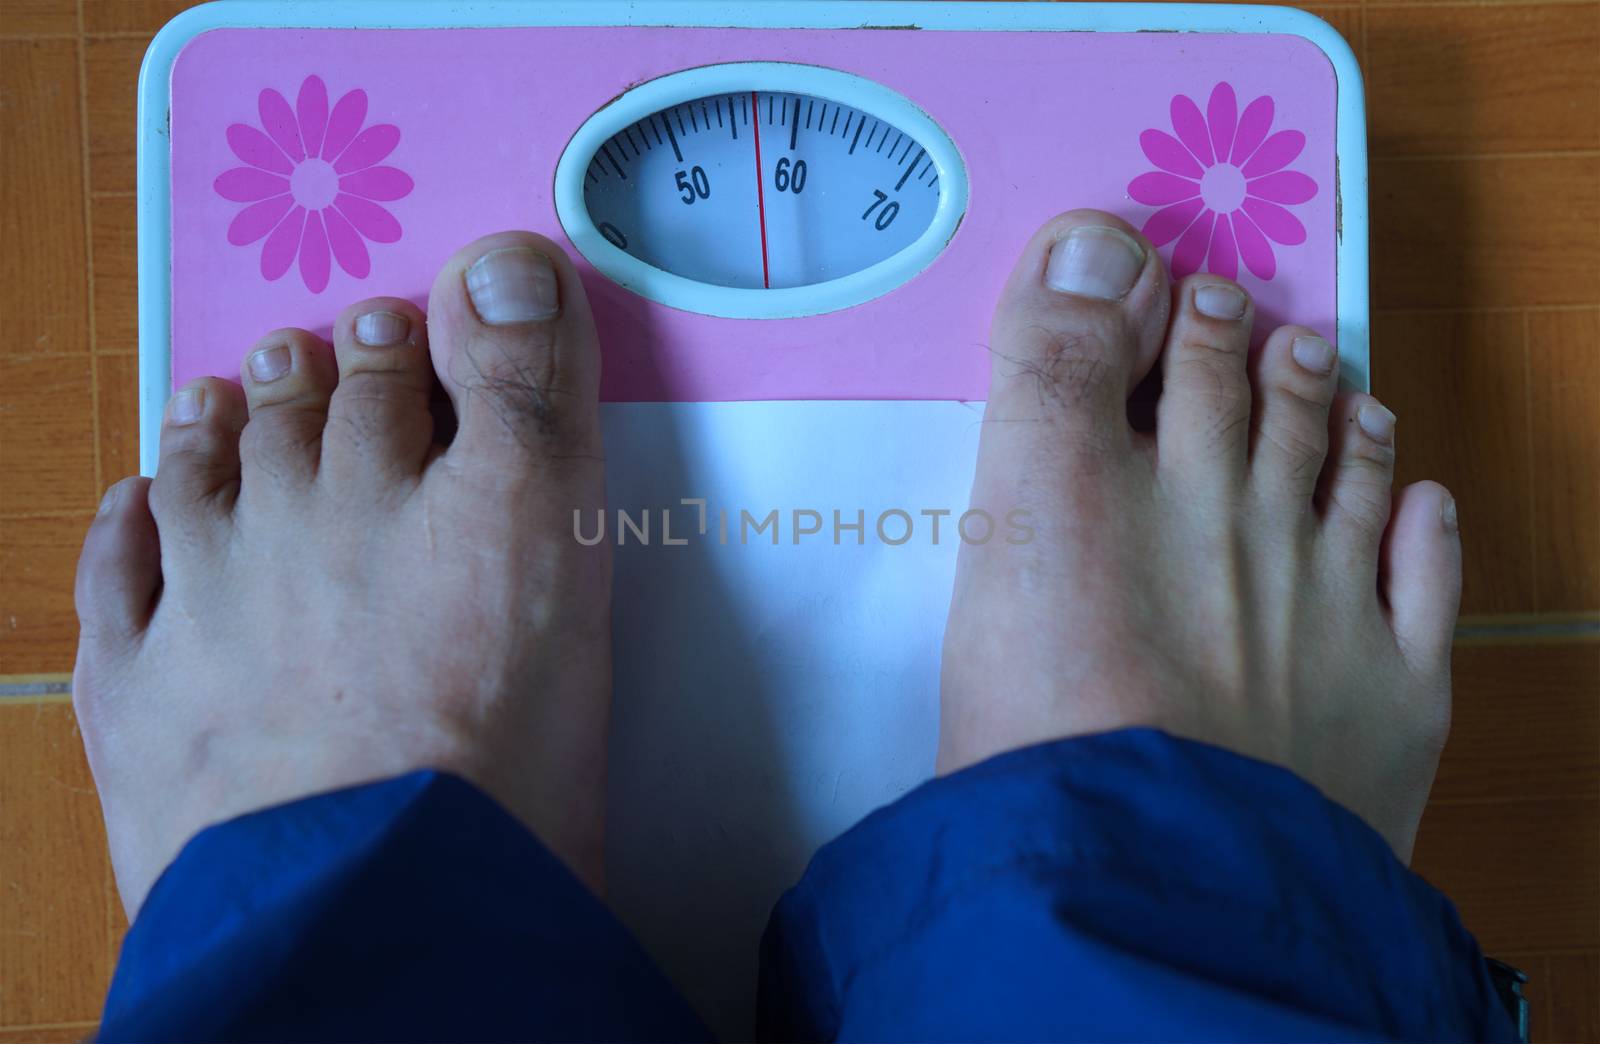 Foot on the weight scale, health and weight management concept.